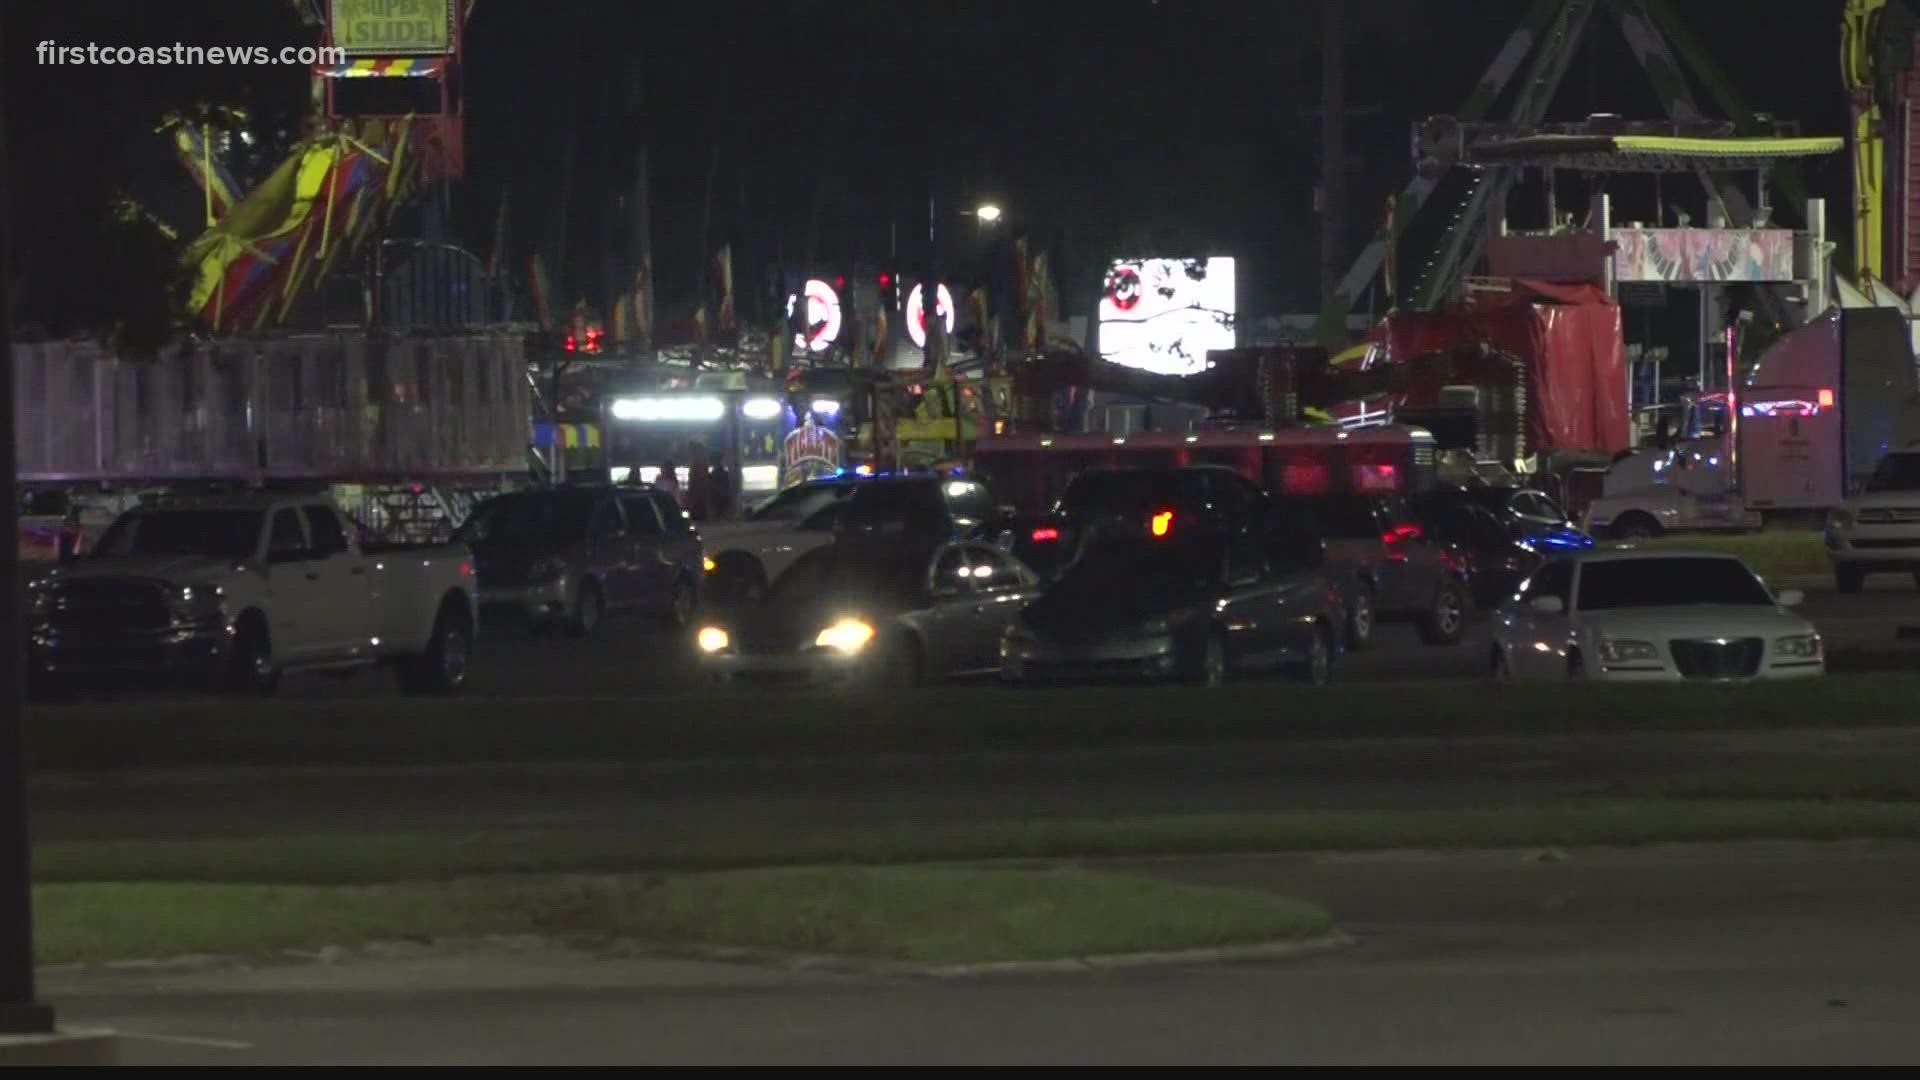 It was the second week of the carnival and Chief Jeff Johnson with the Clay County Sheriff's Office says there were multiple fights in the parking lot.